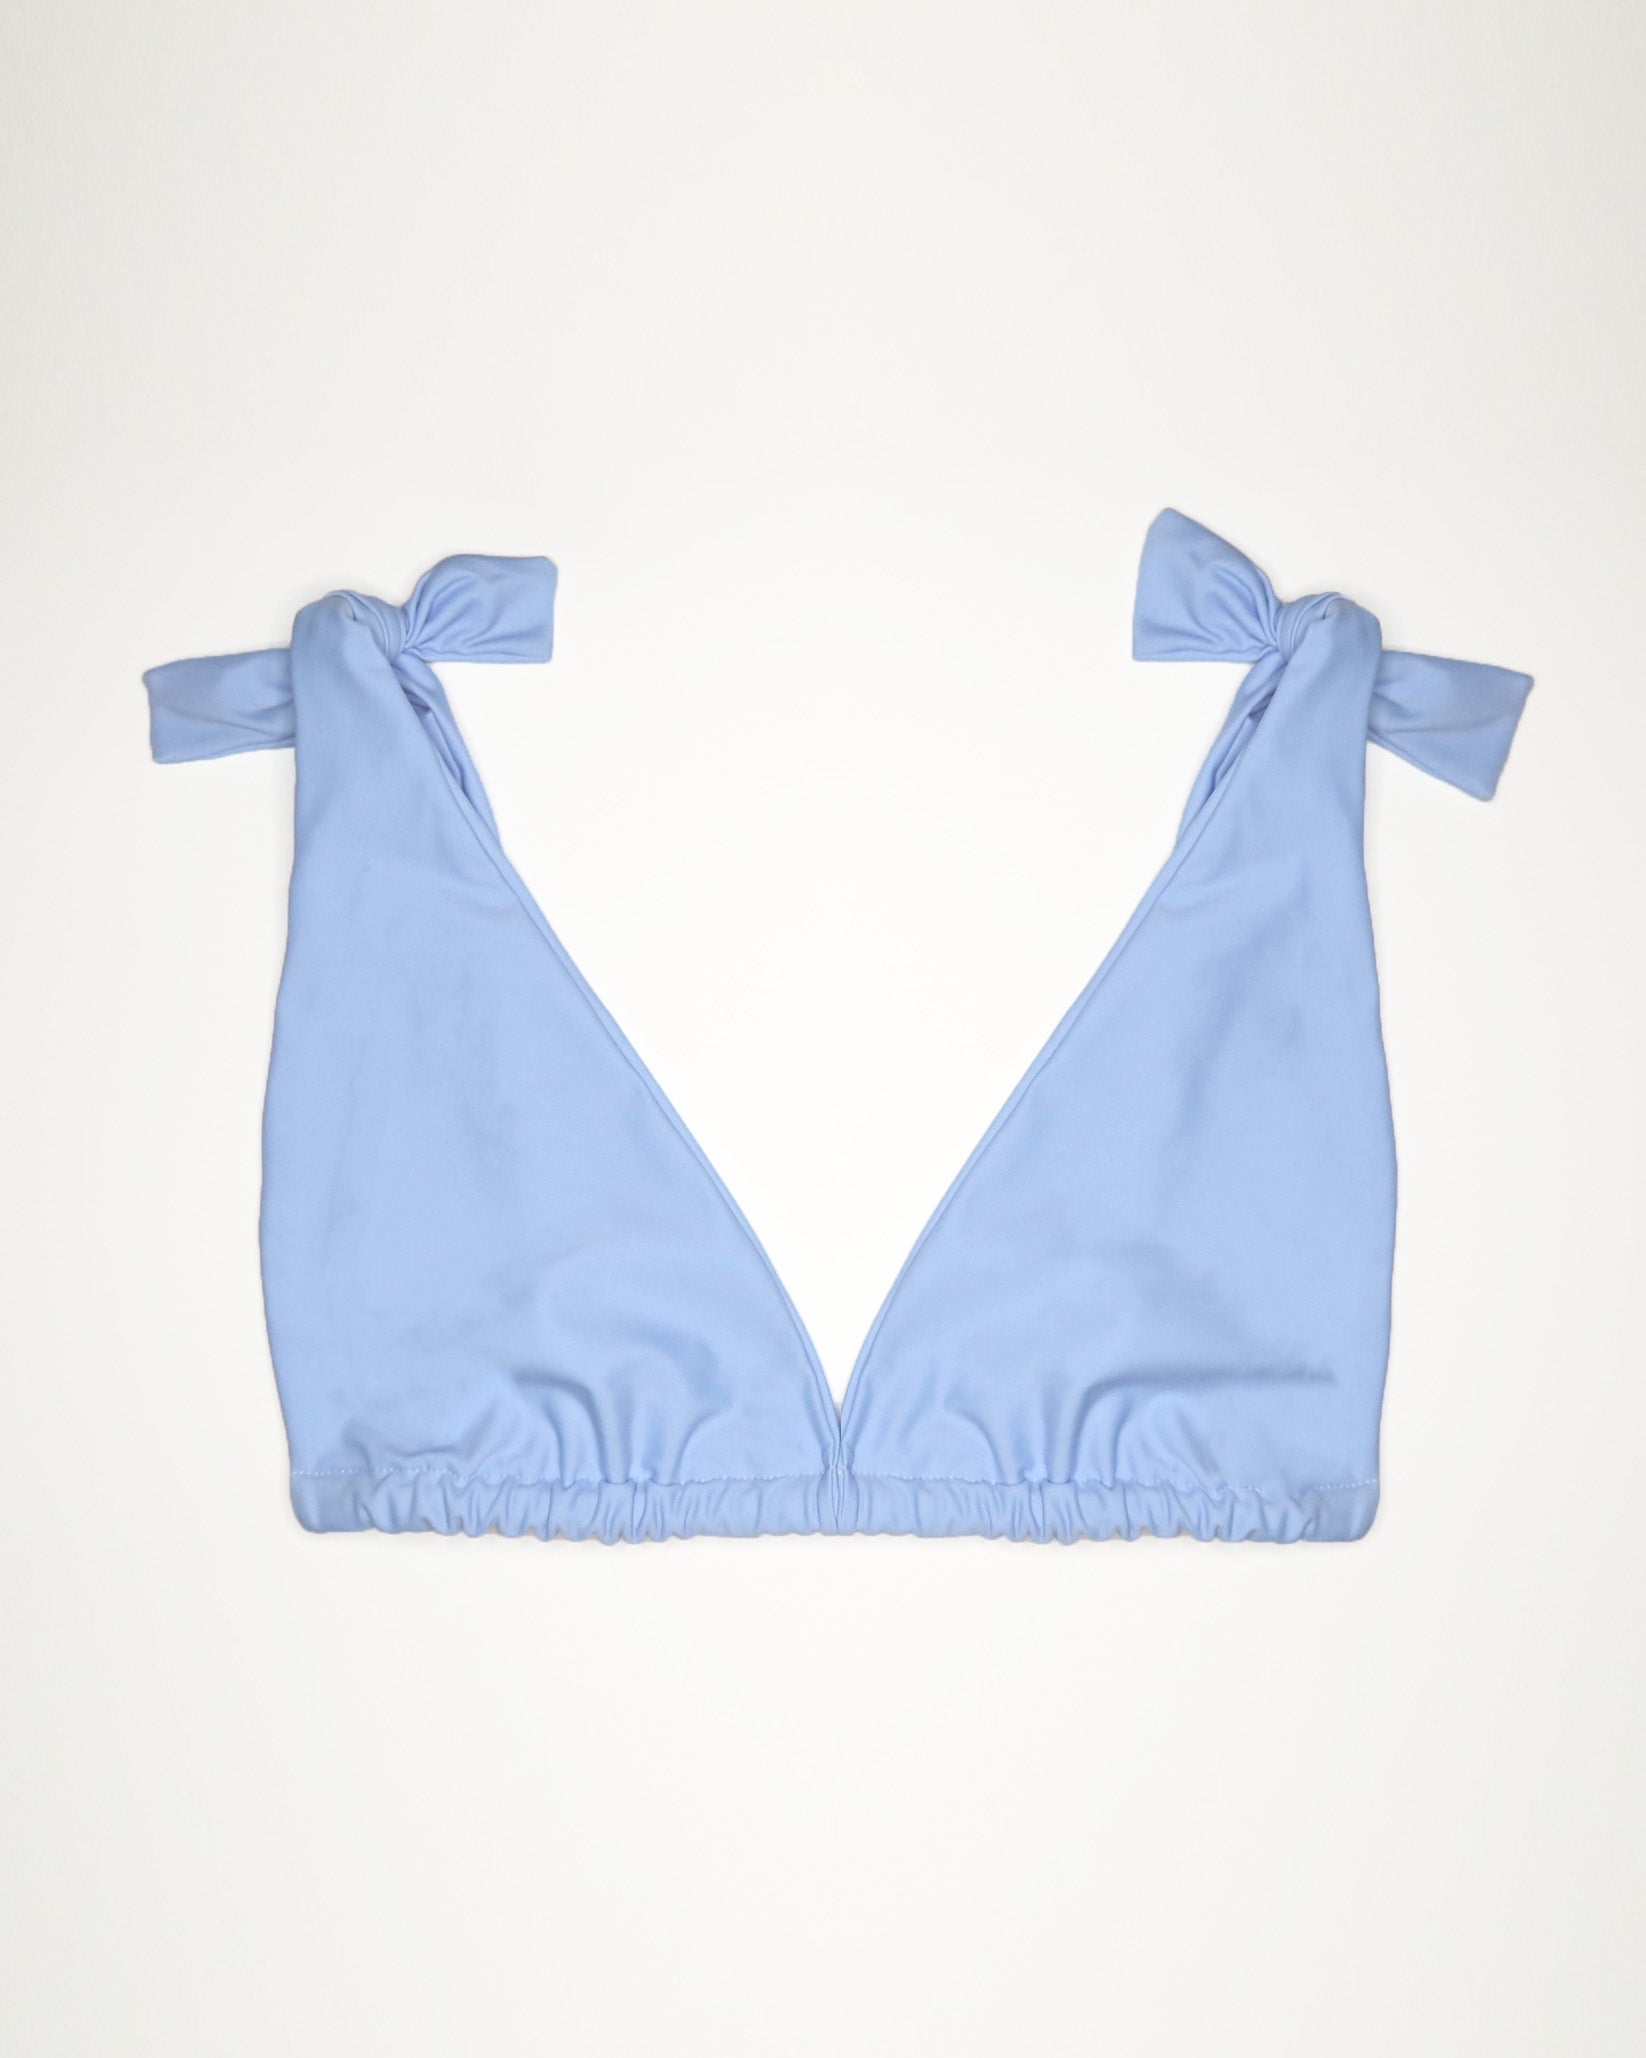 MARY YOUNG Nikki Tie Top in Strobe  Ethical Sustainable Canadian Made  Swimwear